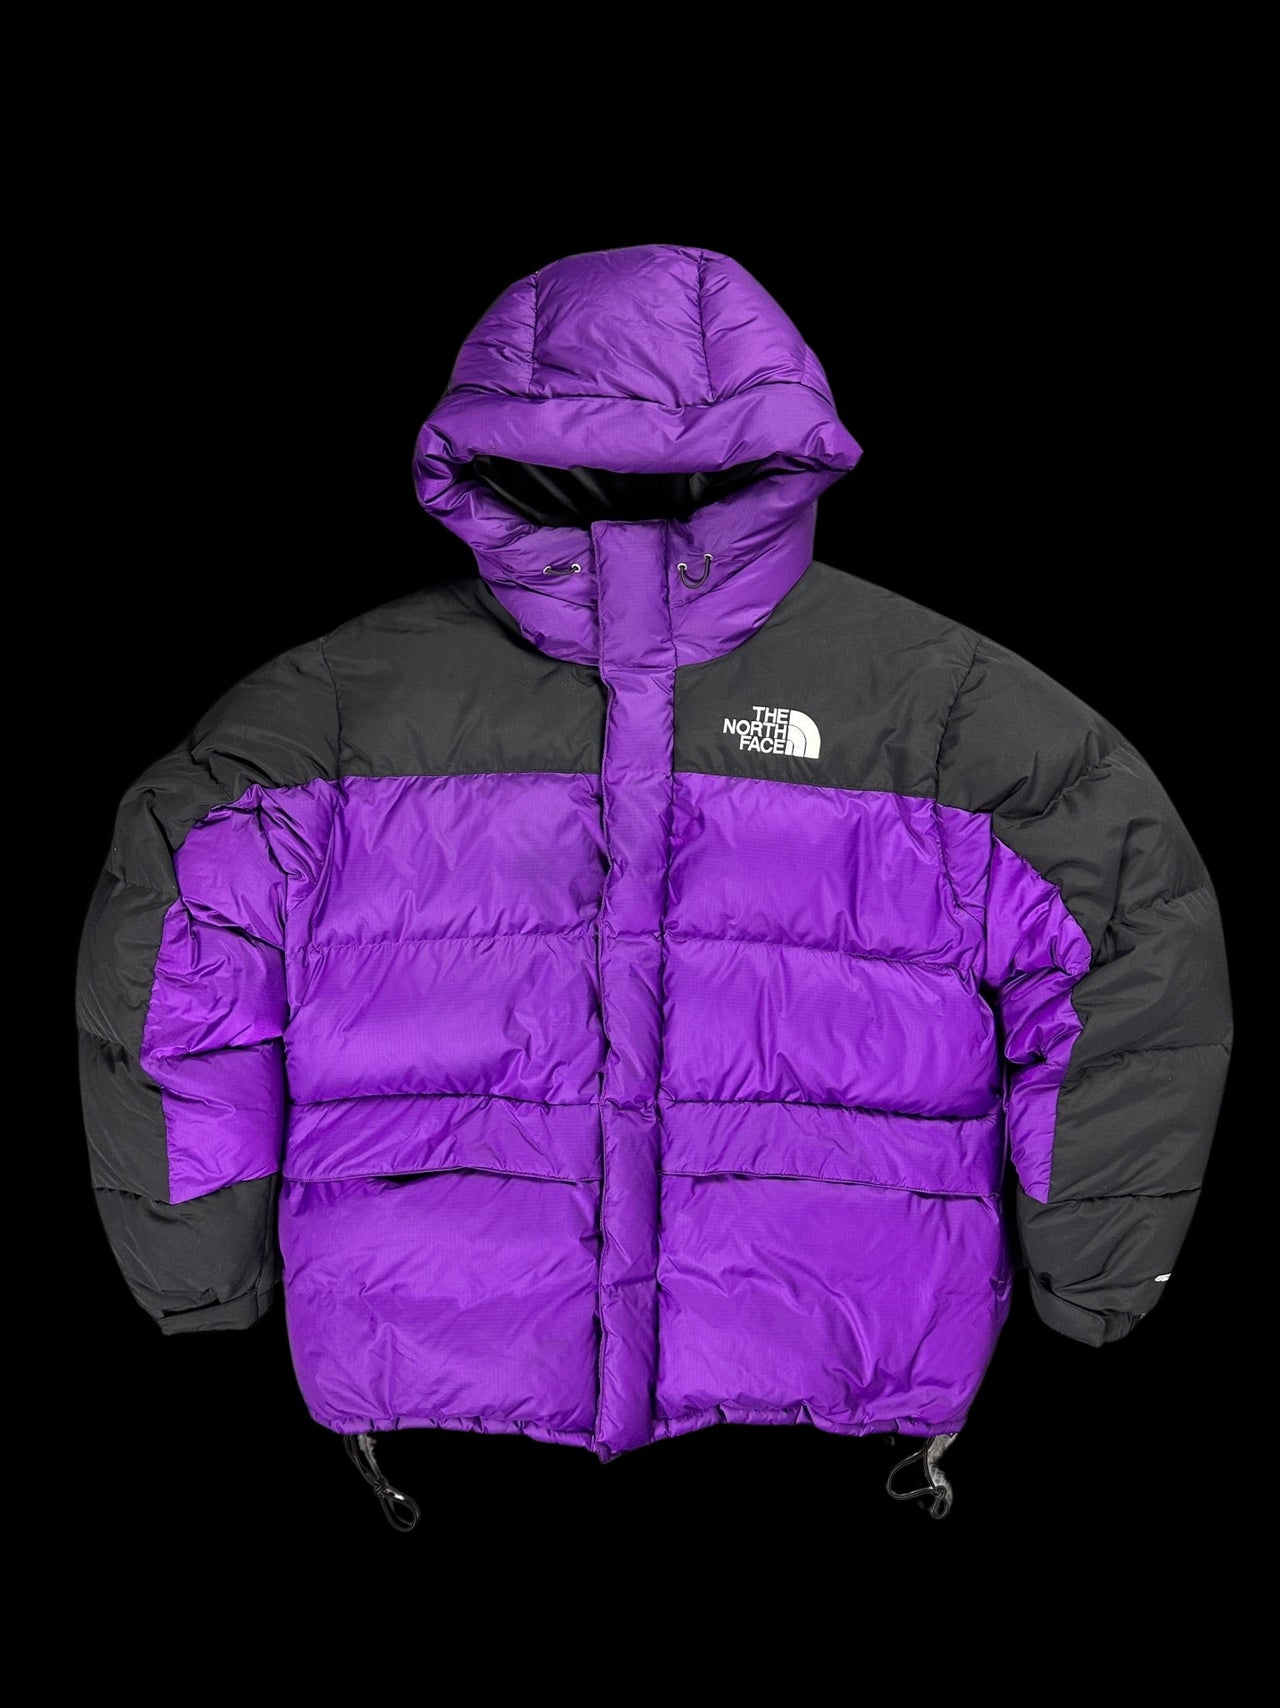 The North Face 550 Pufferjacket (XL)